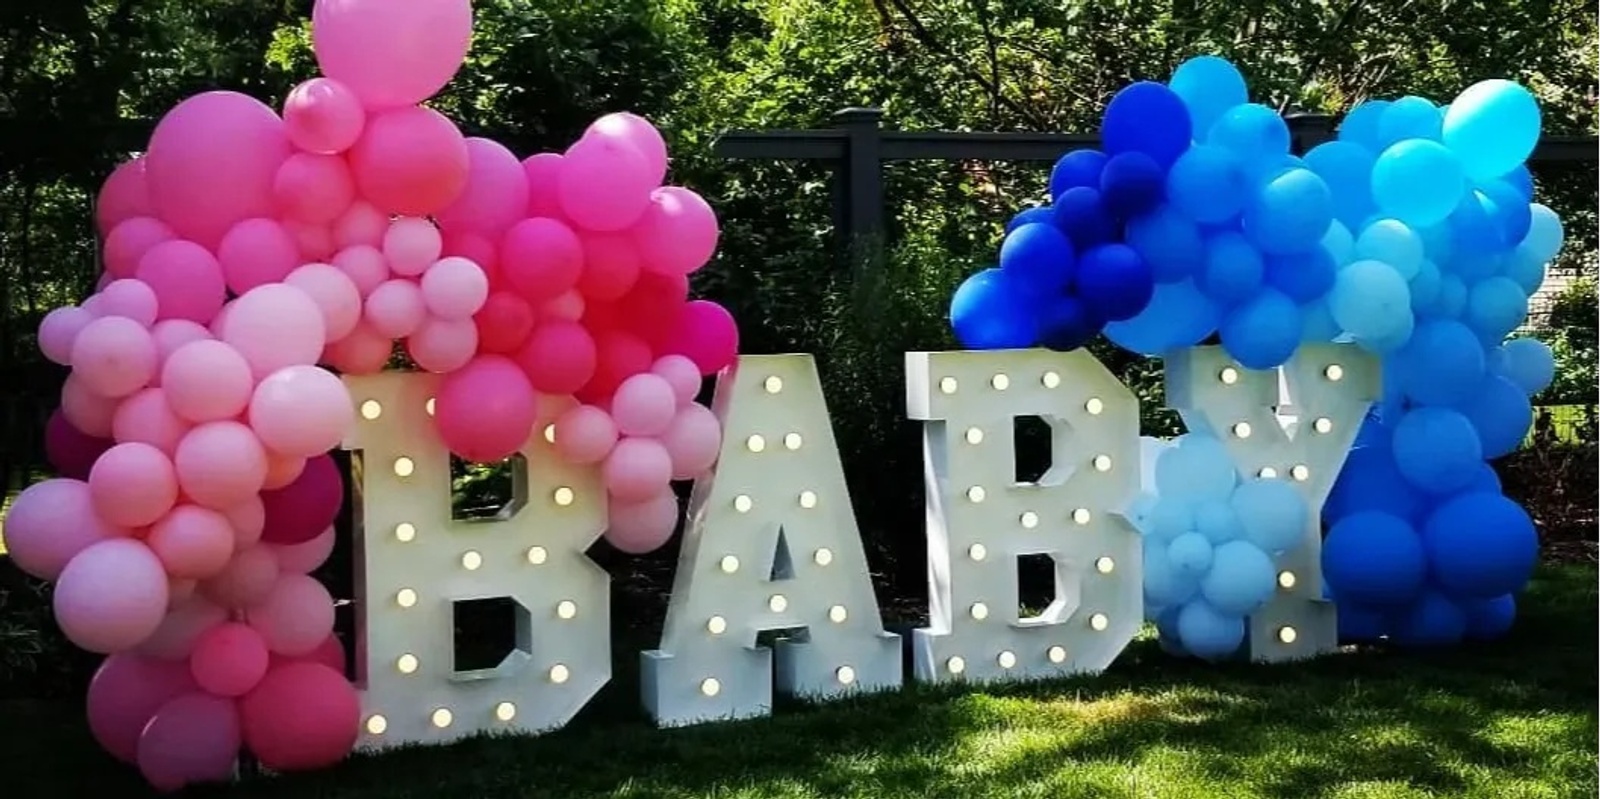 Balloons and Bowties: Fun DIY Gender Reveal Ideas